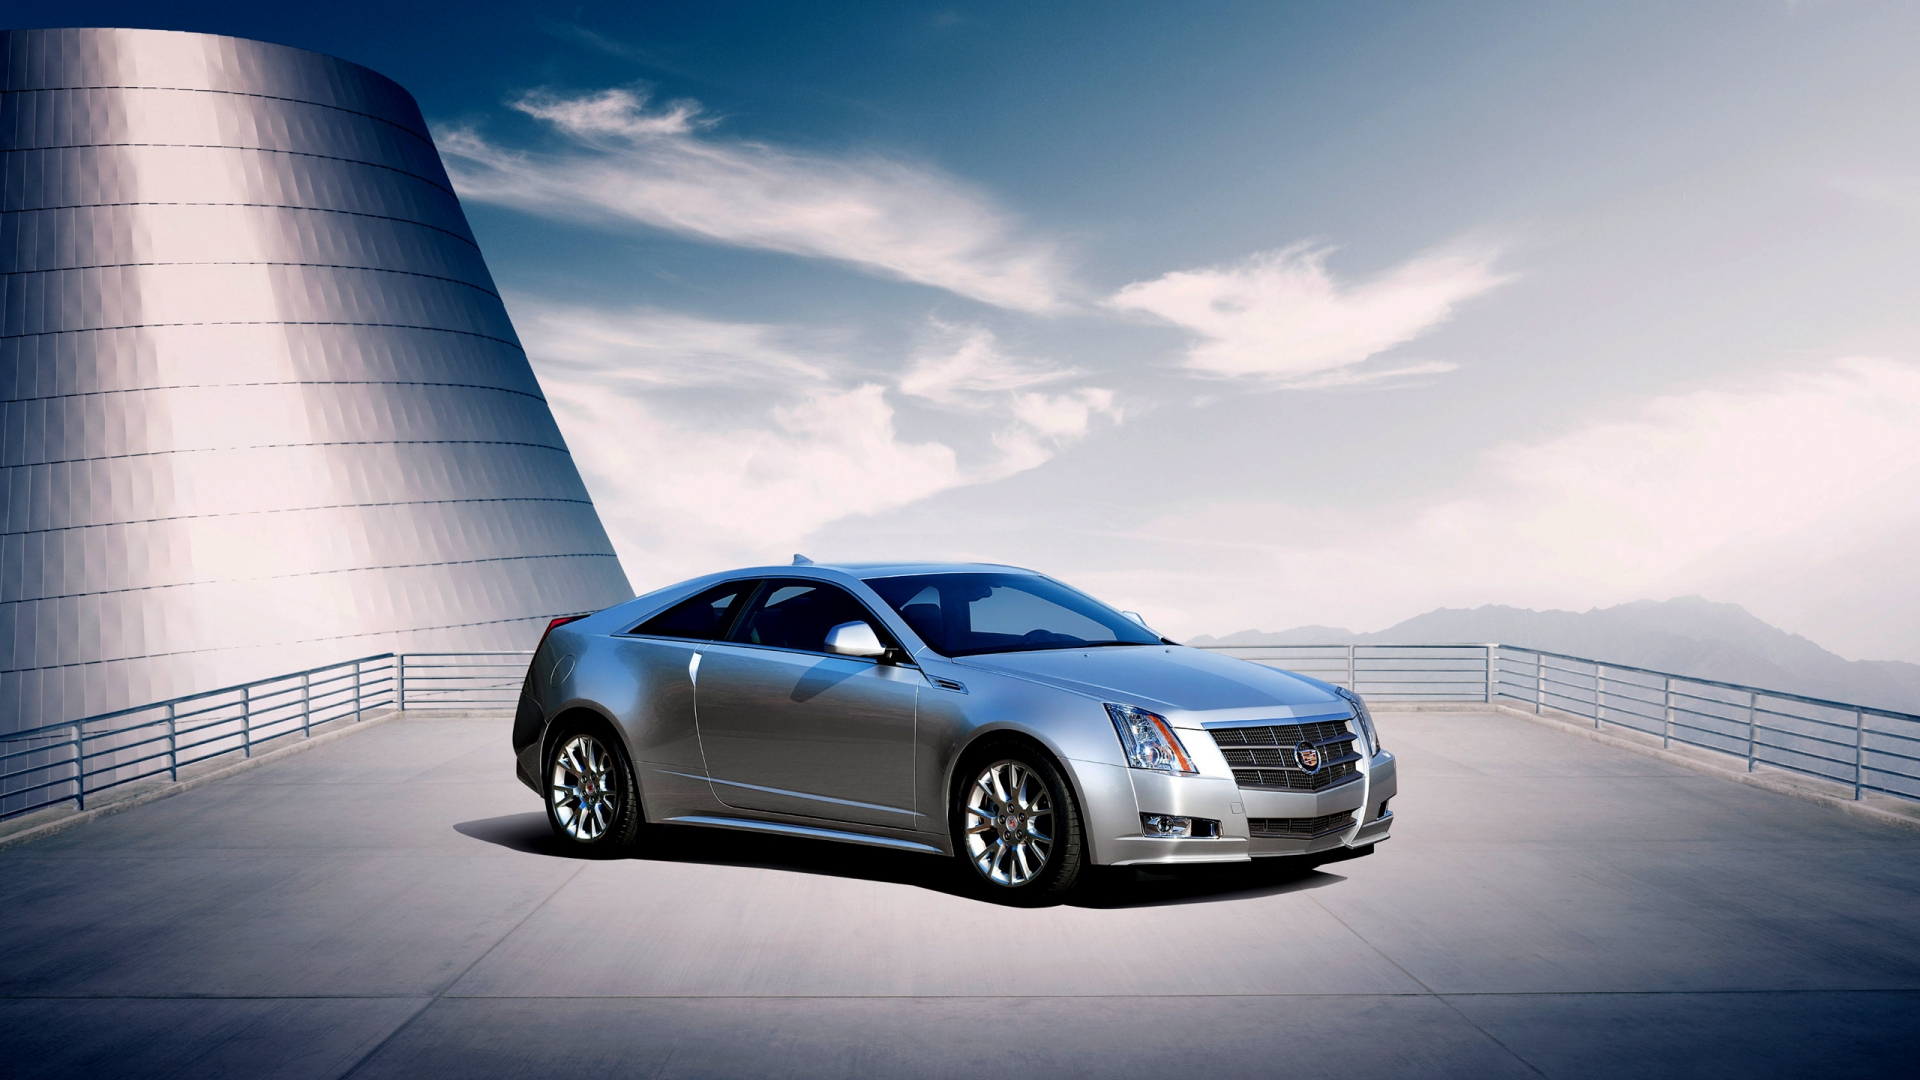 2011 Cadillac CTS Coupe for 1920 x 1080 HDTV 1080p resolution